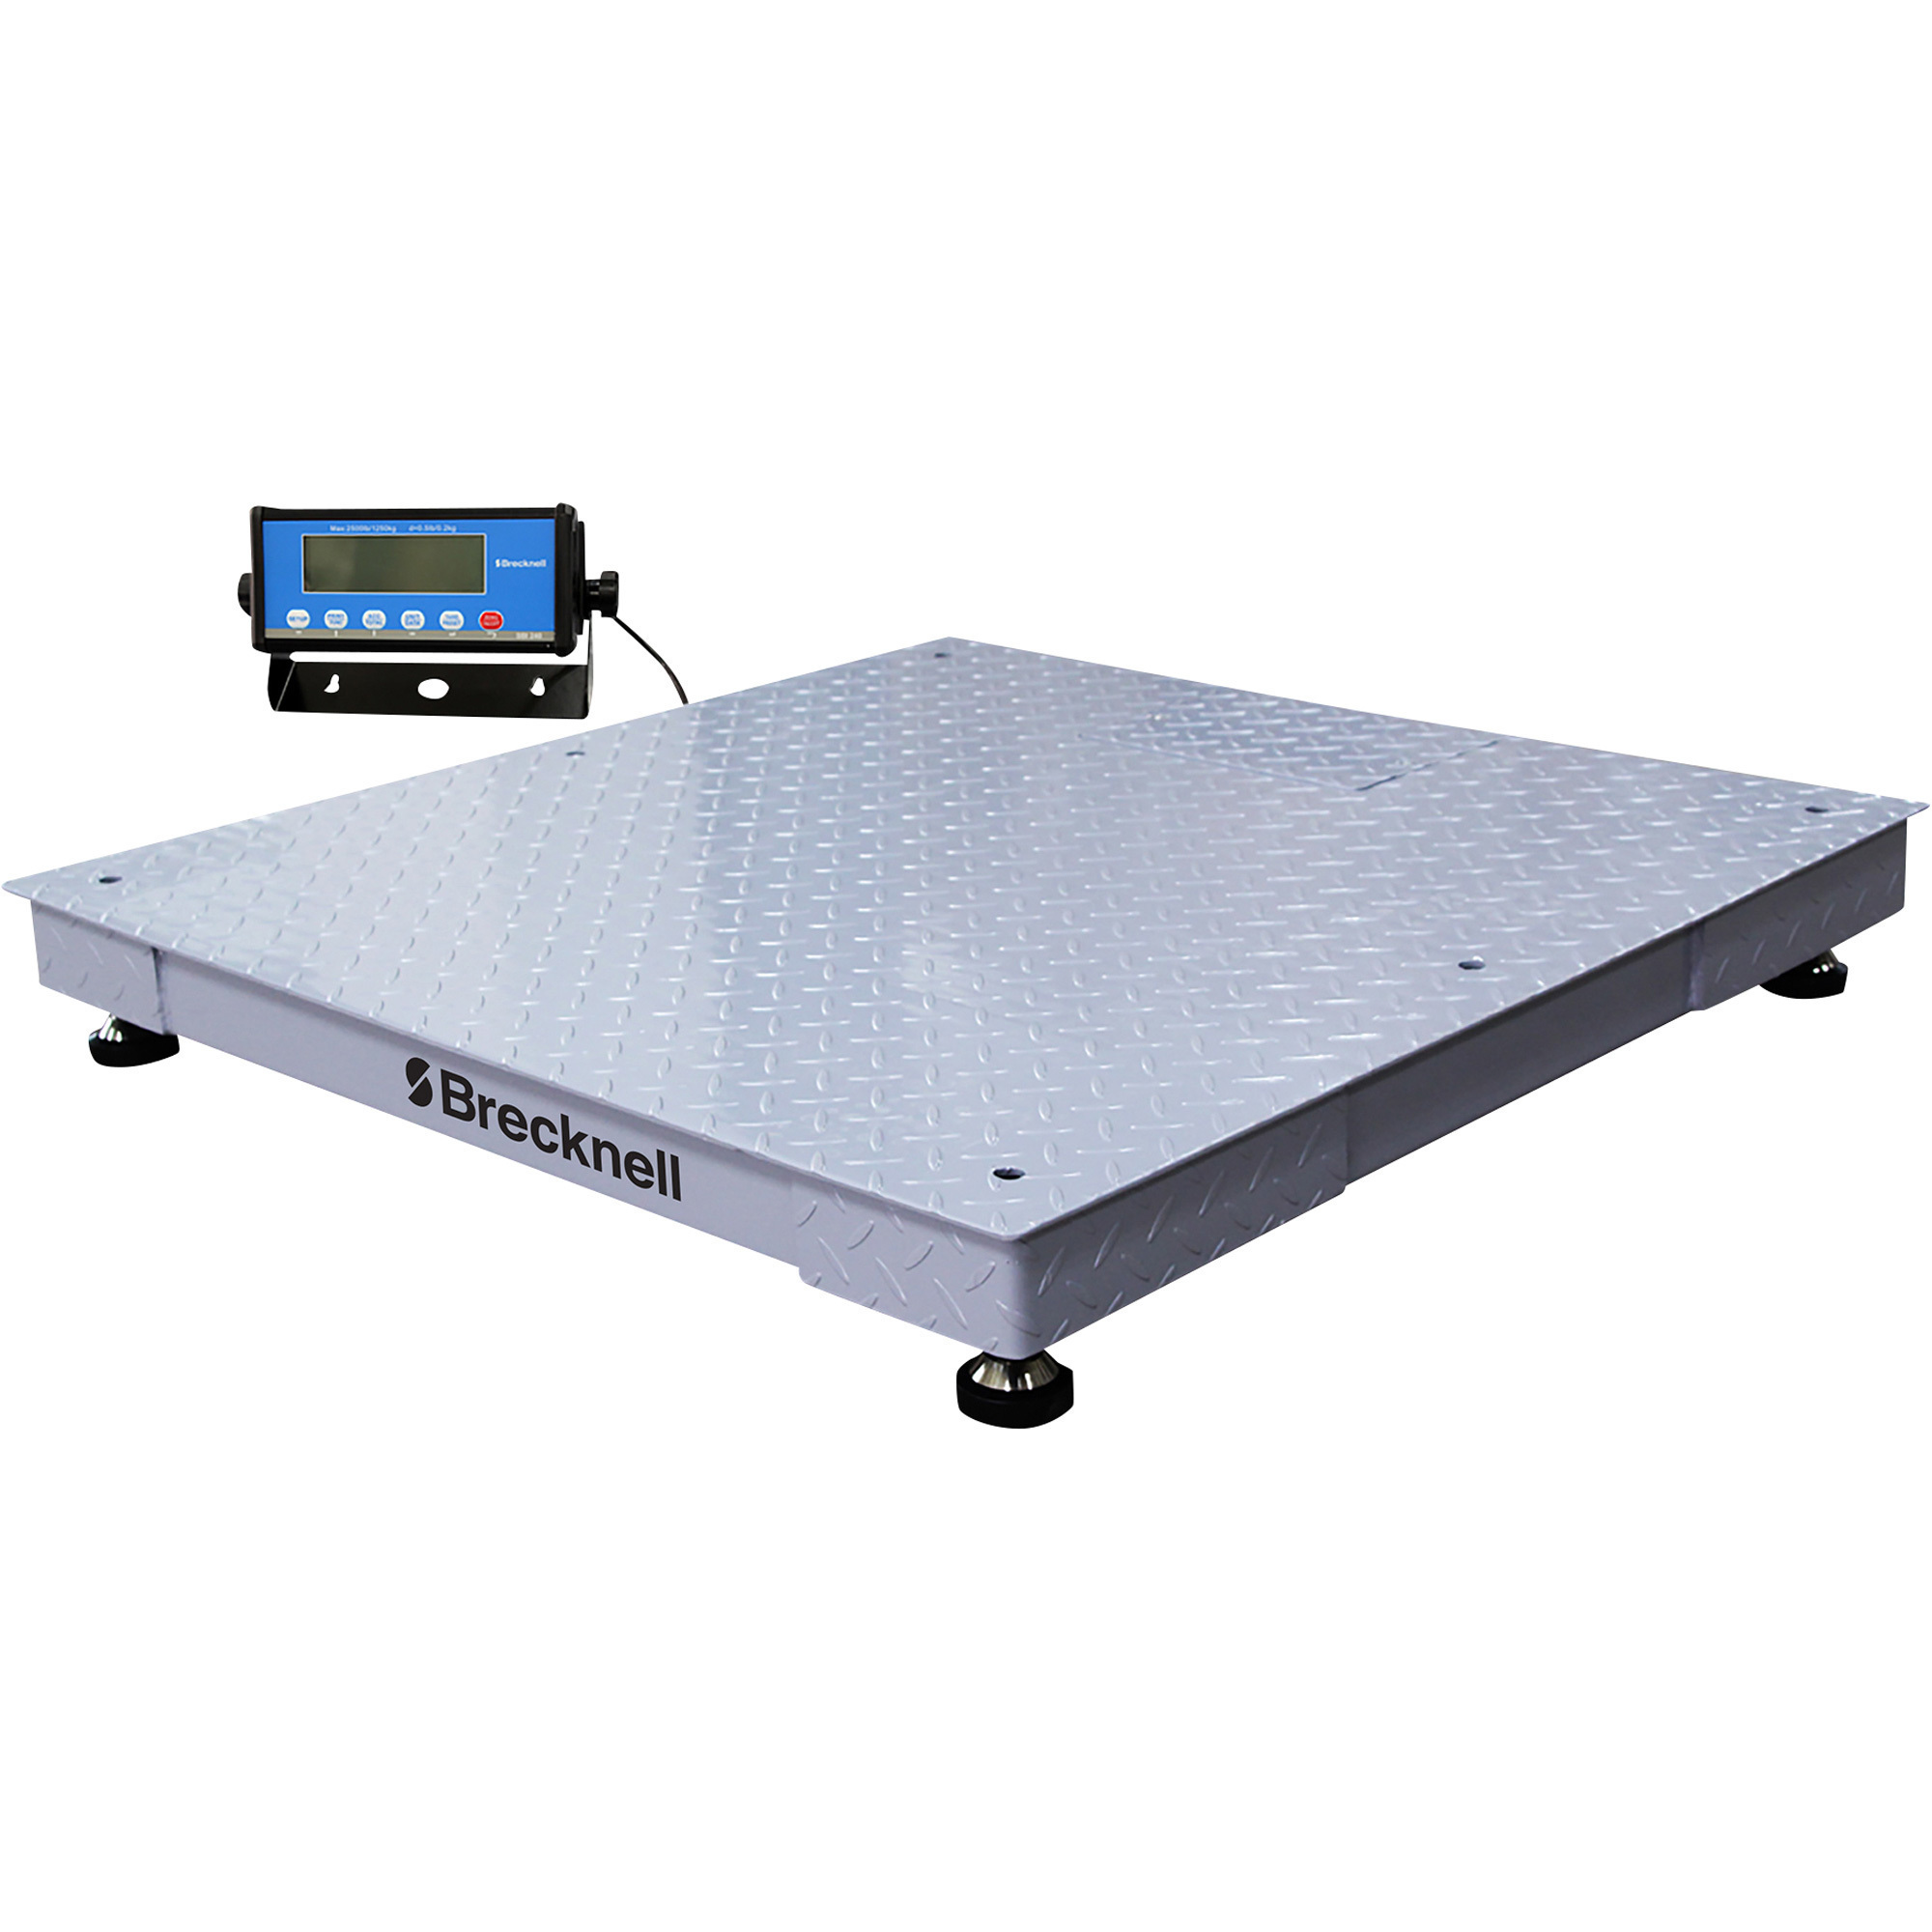 Brecknell Floor Scale with SBI240 LCD indicator, 5000-Lb. Capacity, 48Inch x 48Inch Deck, Model 810036380058